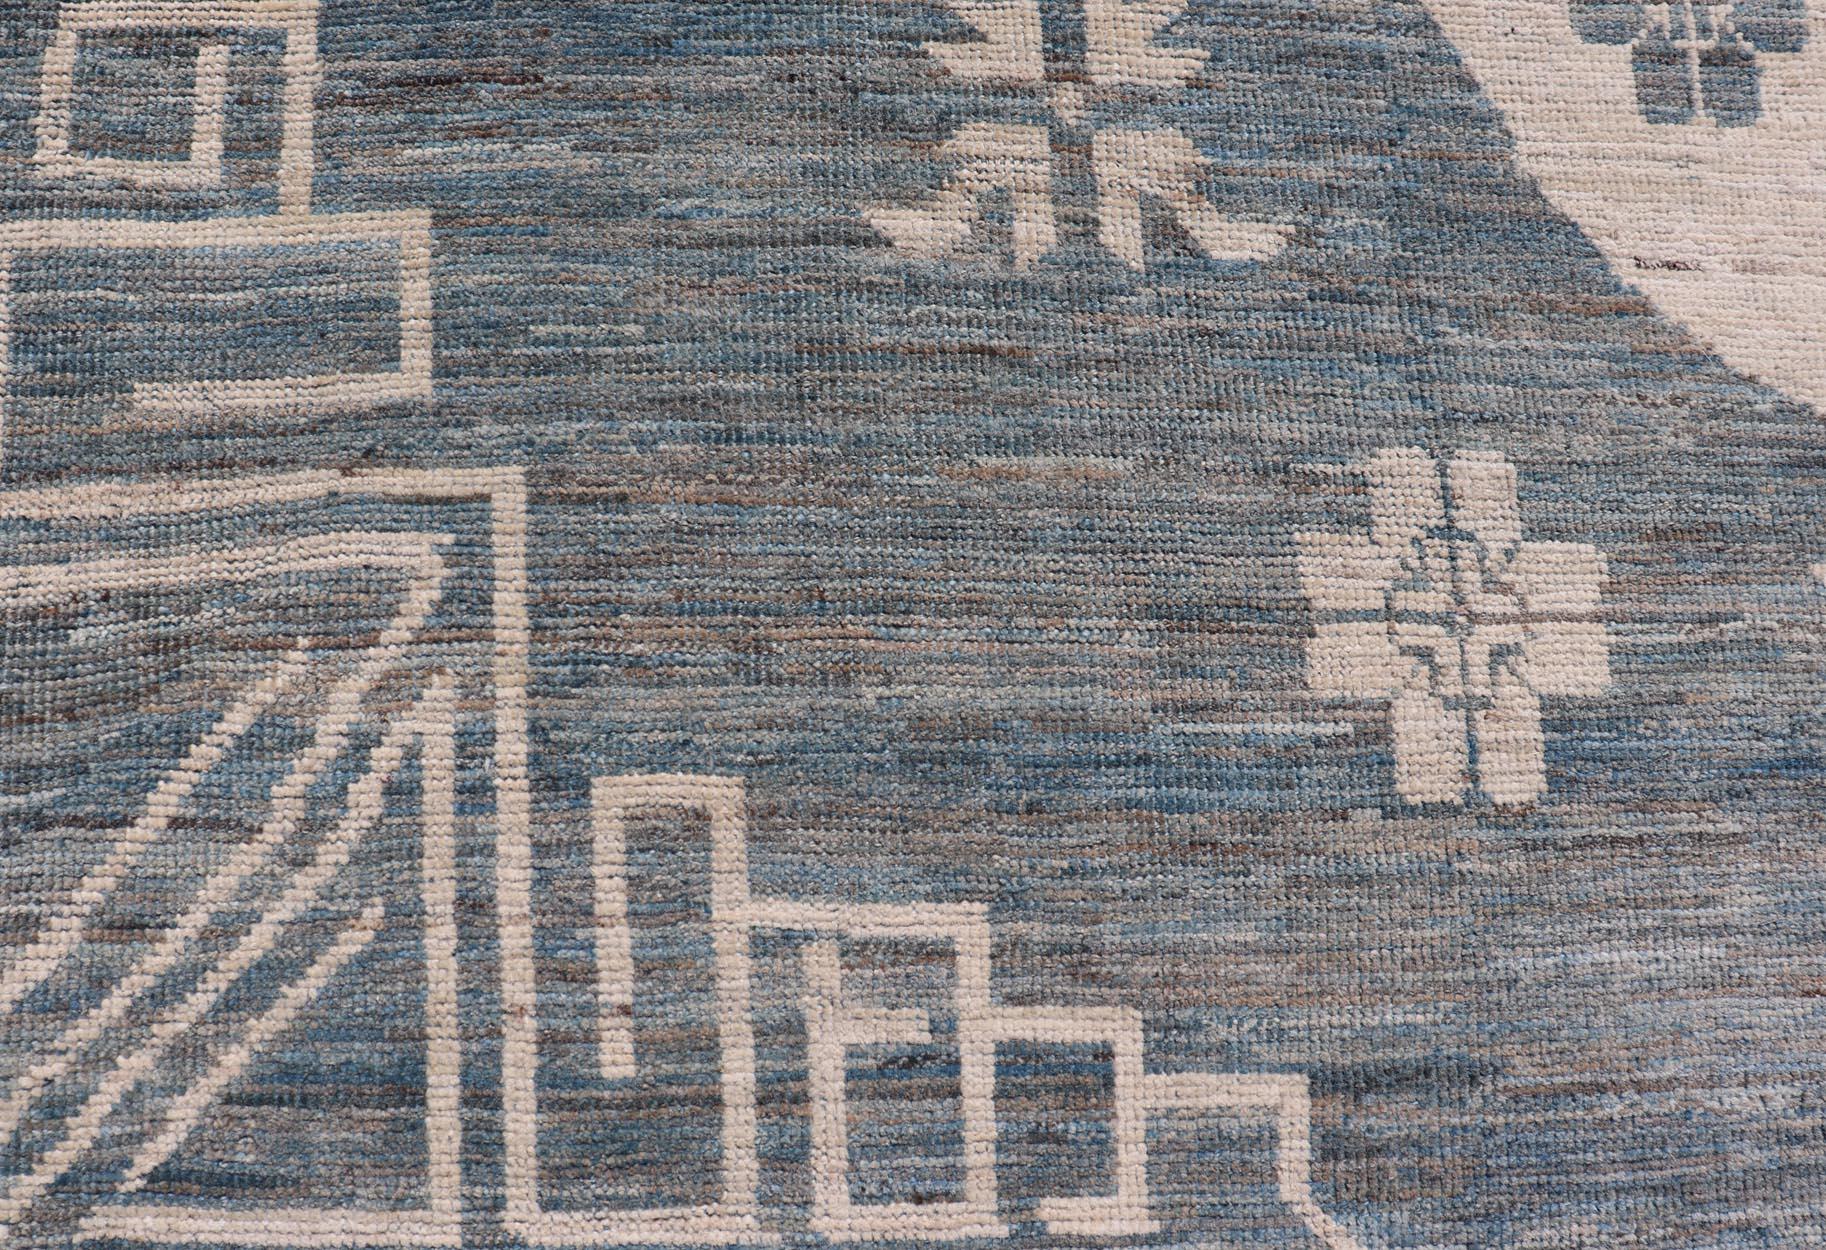 Wool Modern Khotan Rug with Circular Medallions in Shades of Steel Blue & off White For Sale